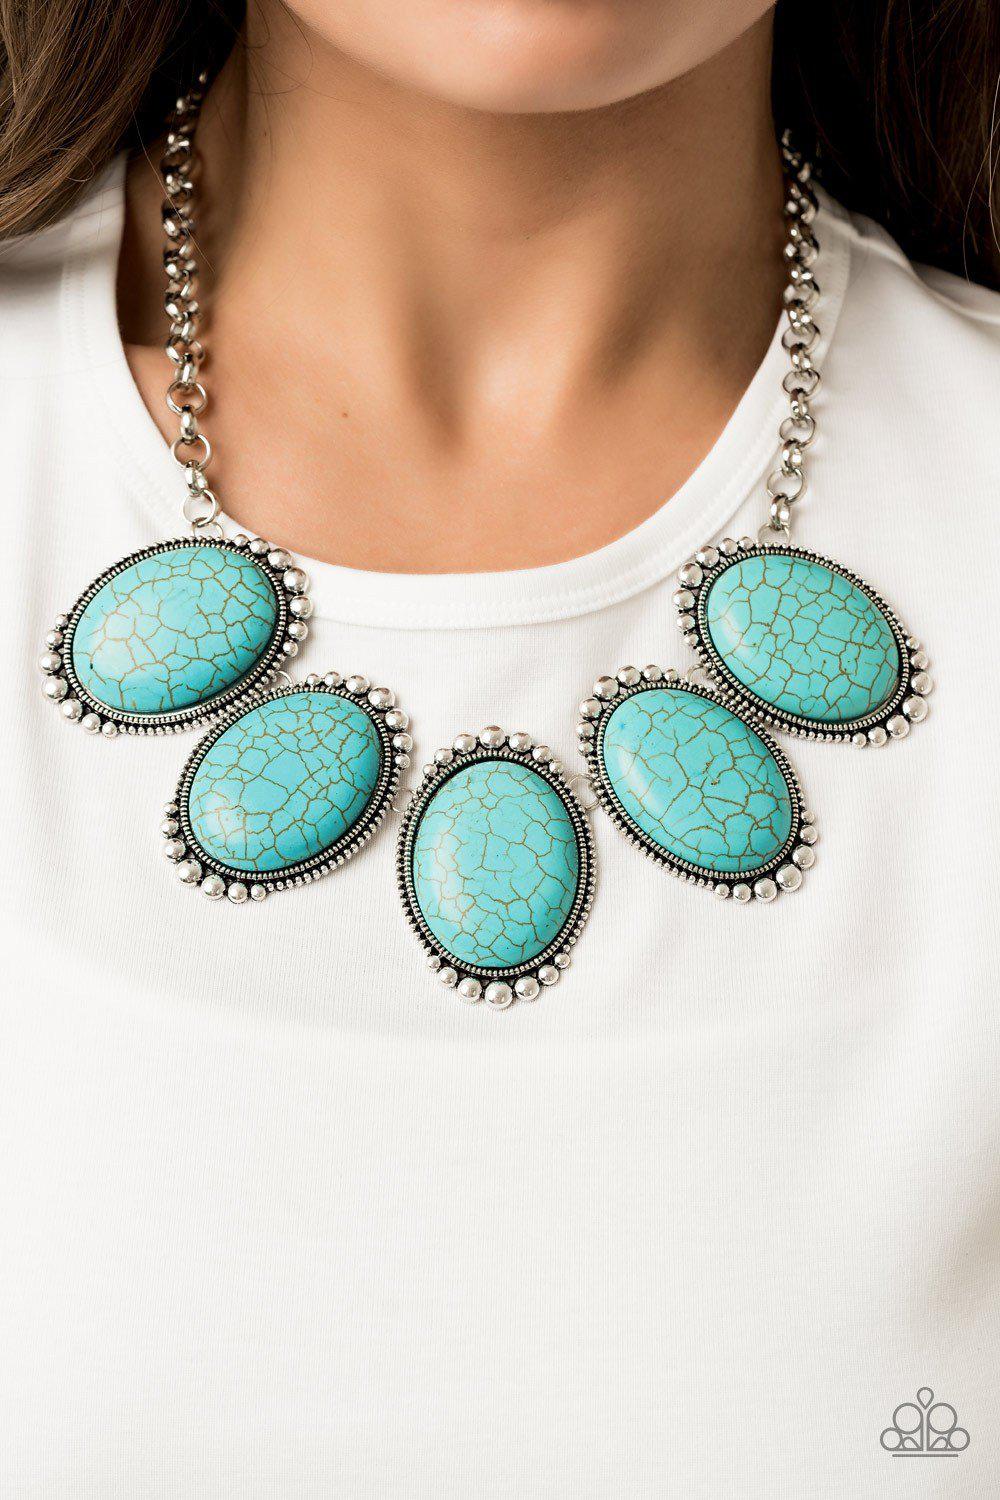 Prairie Goddess Turquoise Blue Stone Necklace - Paparazzi Accessories-CarasShop.com - $5 Jewelry by Cara Jewels